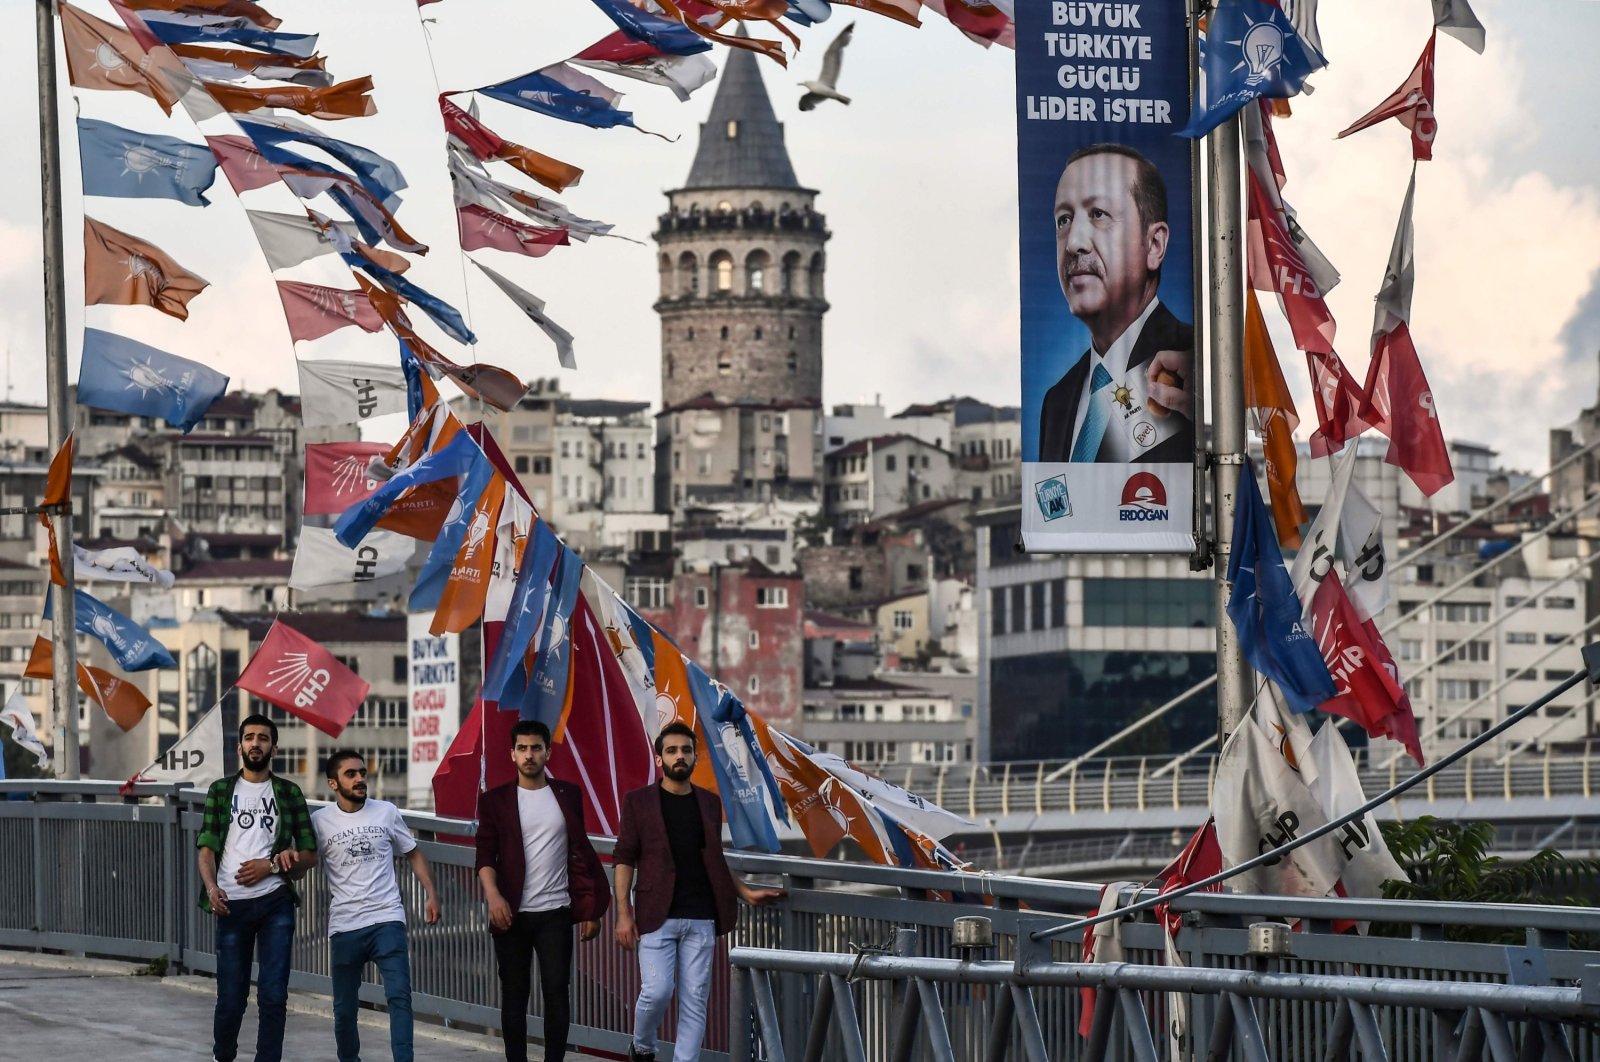 People pass by banners with the portrait of President Erdoğan in Istanbul, June 18, 2018. (AFP)